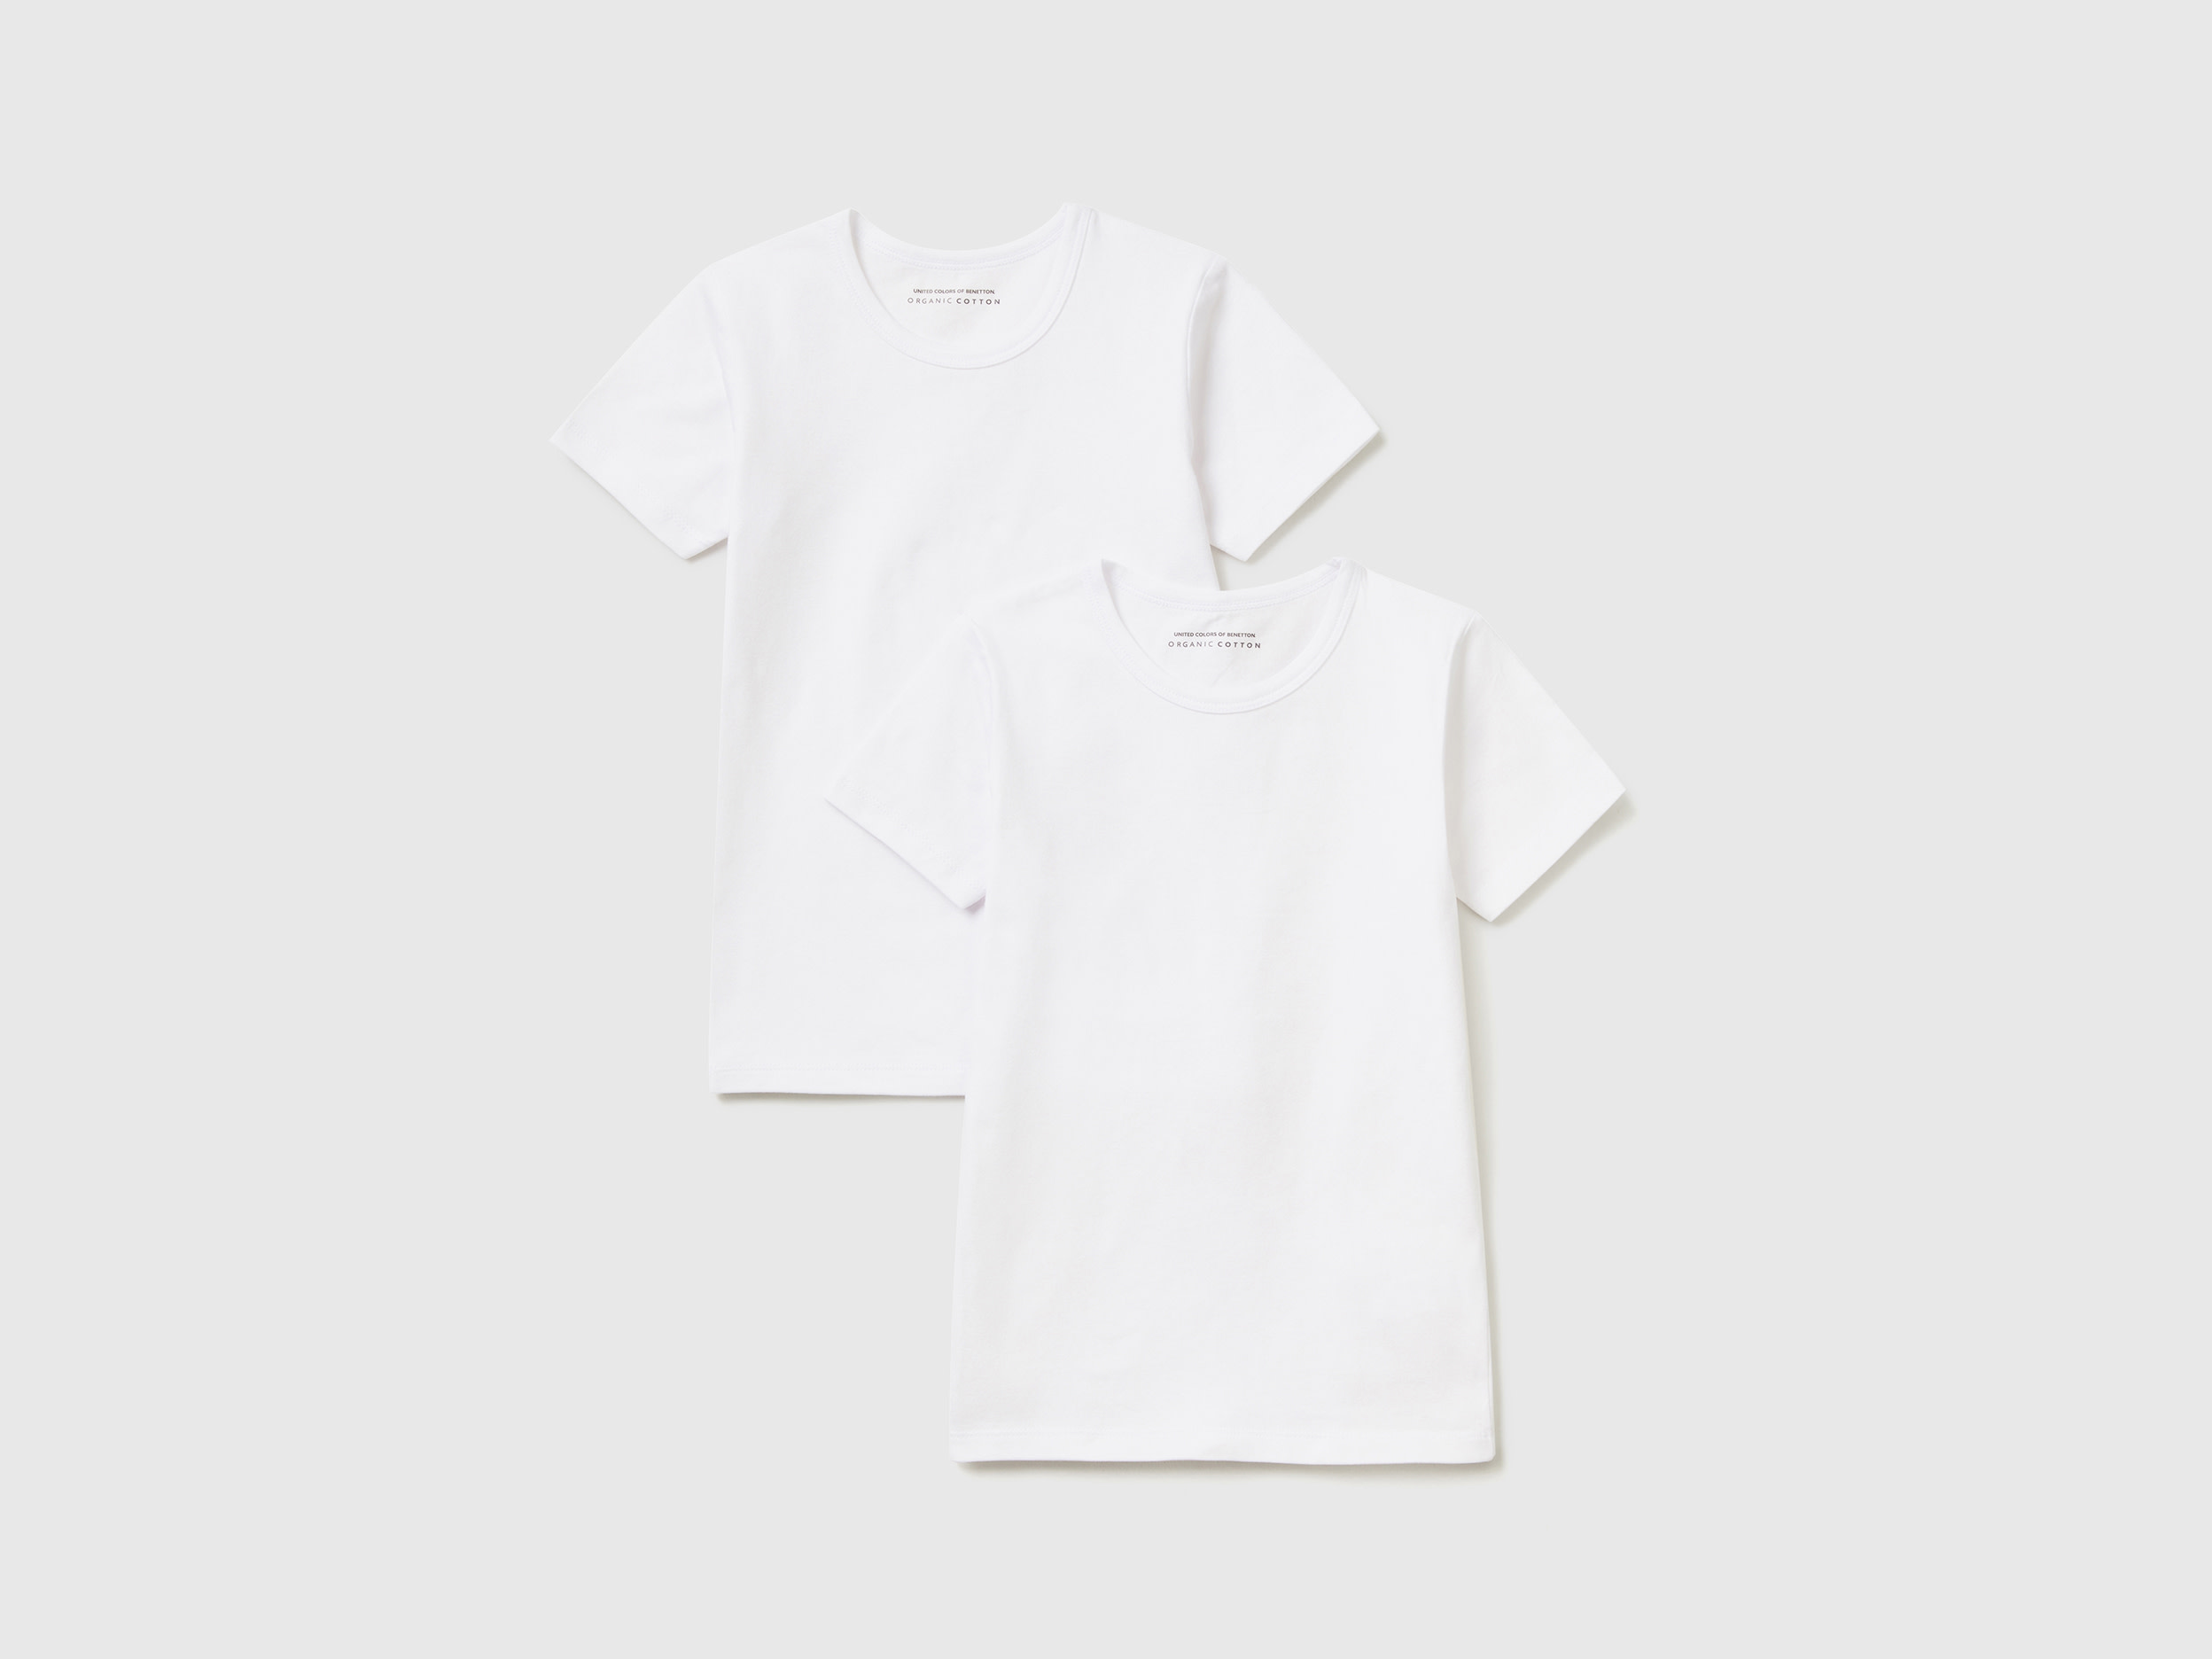 Image of Benetton, Two Stretch Organic Cotton T-shirts, size S, White, Kids